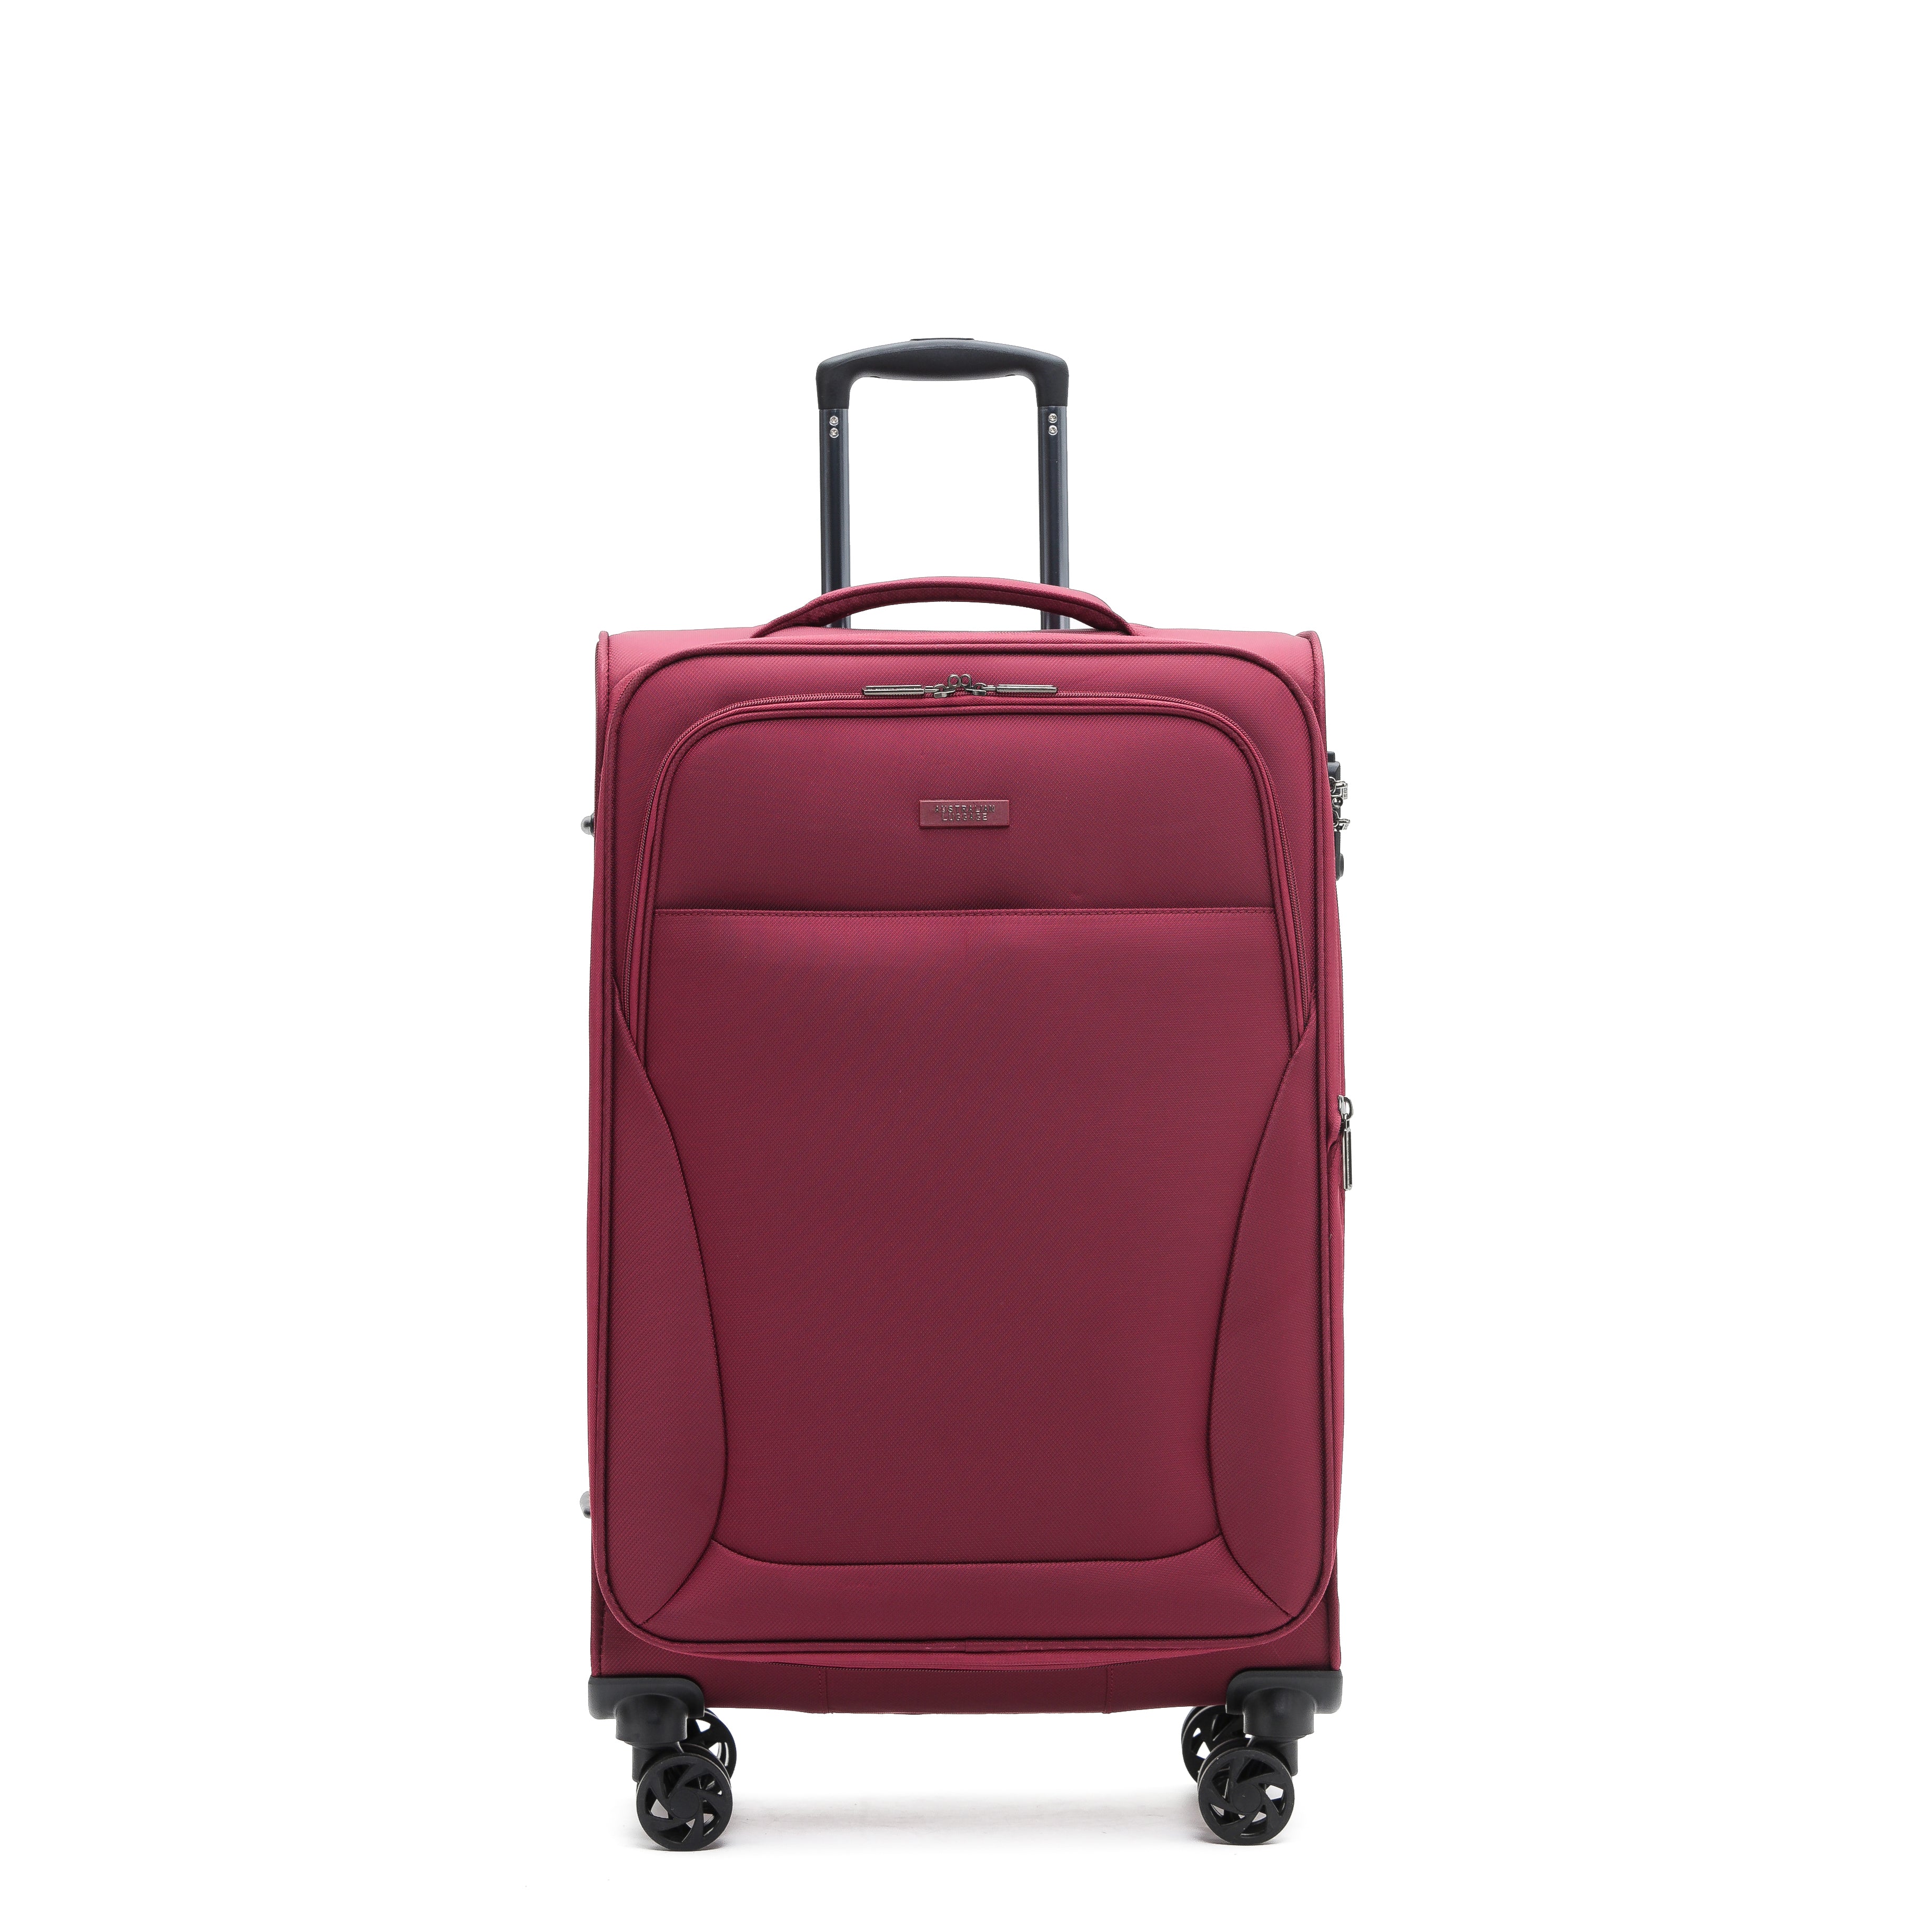 Aus Luggage - WINGS Set of 3 Suitcases - Wine-9